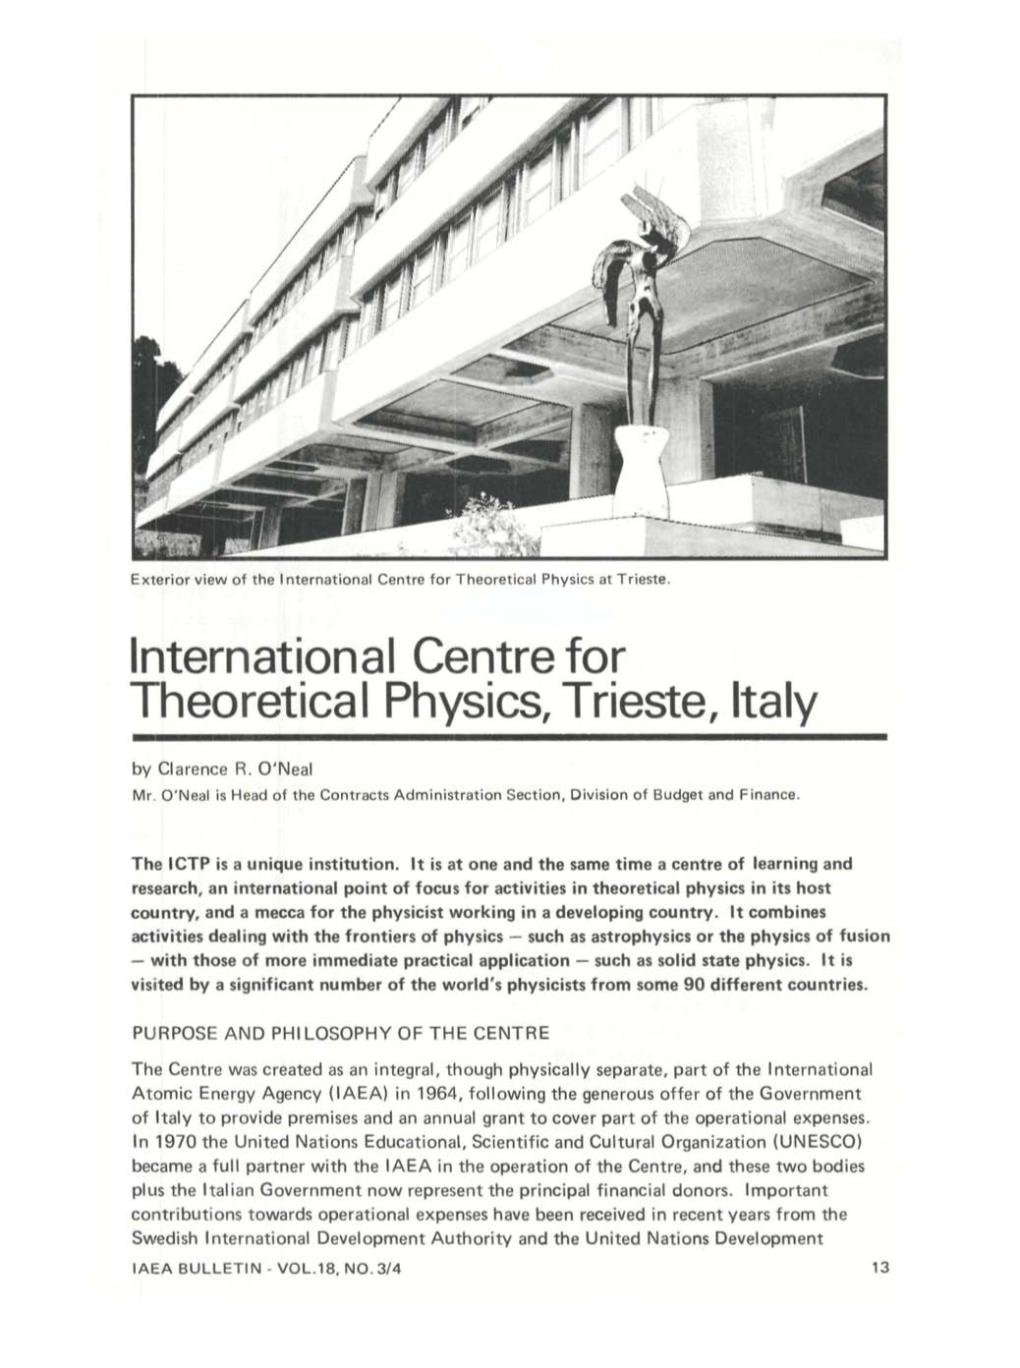 International Centre for Theoretical Physics, Trieste, Italy by Clarence R